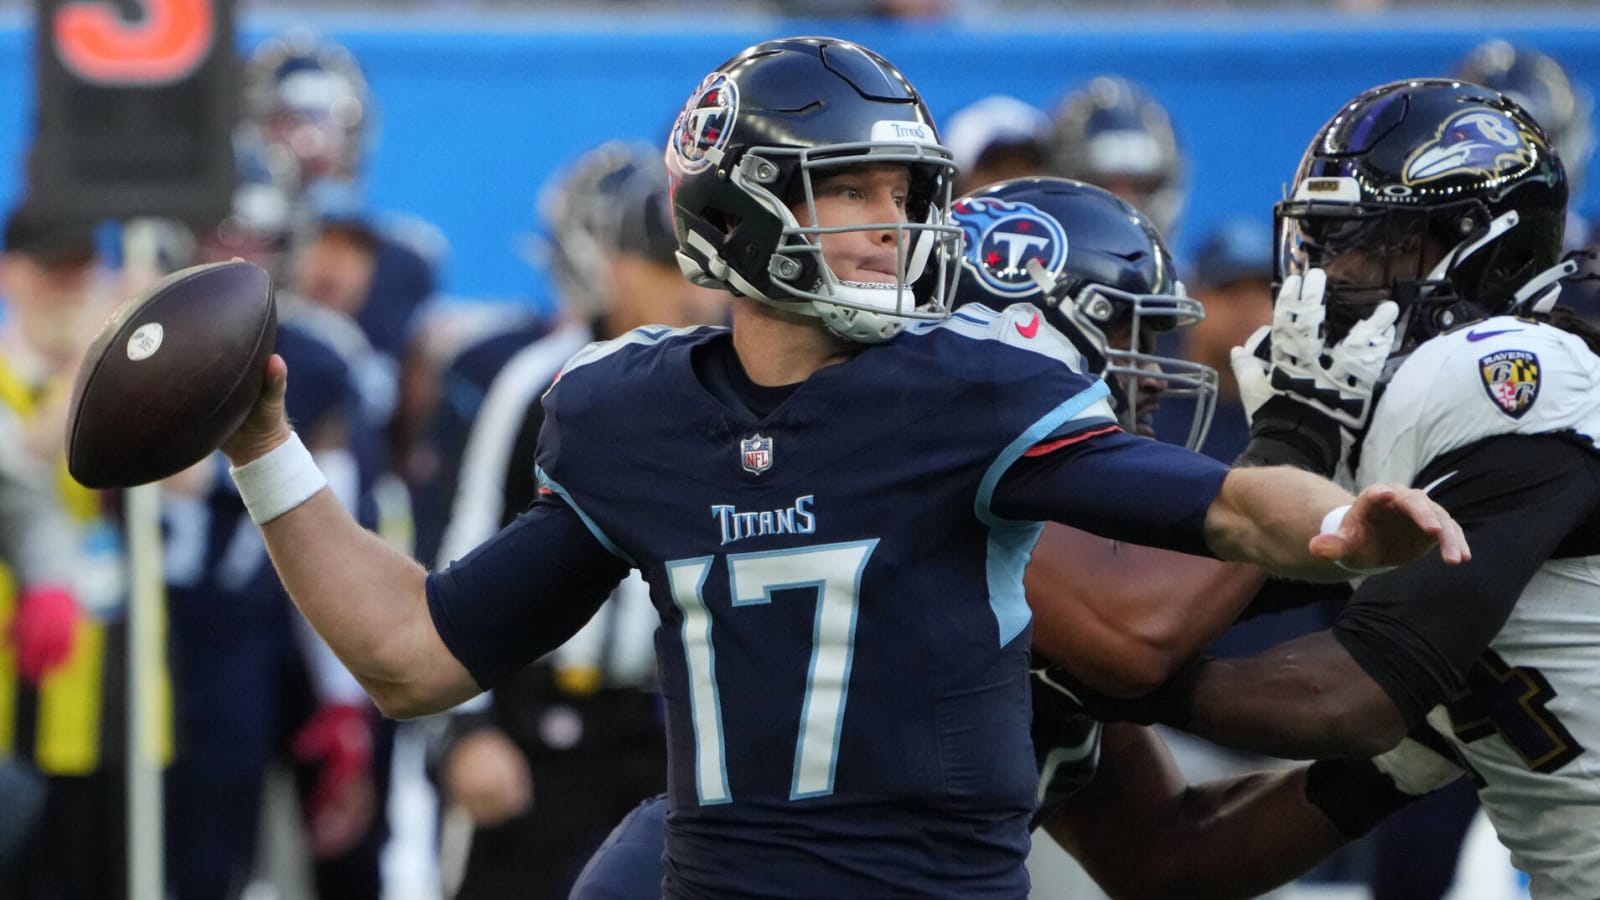 Could Titans QB become available after trade deadline?